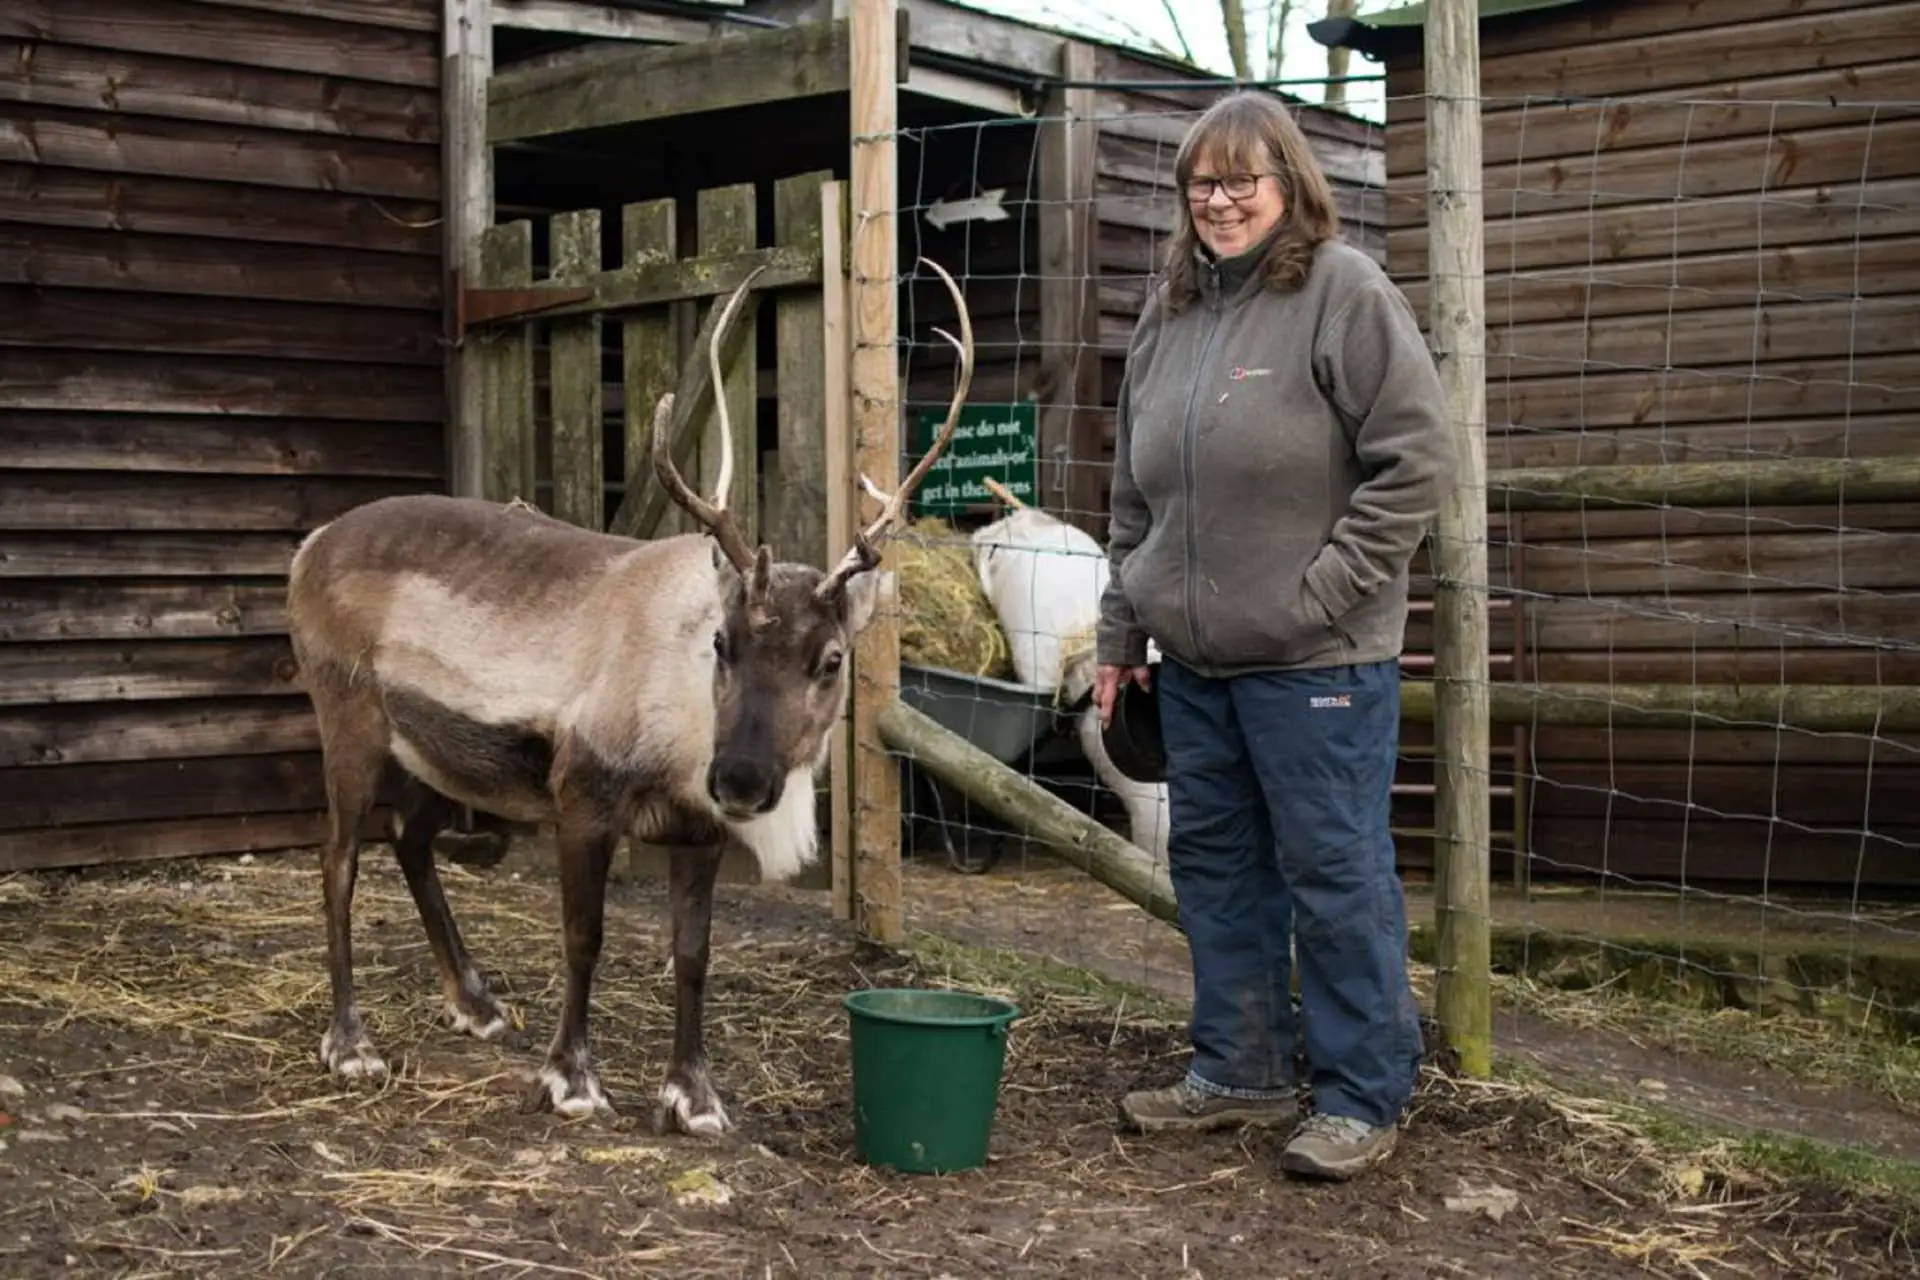 Josie Morris with a deer on the farm